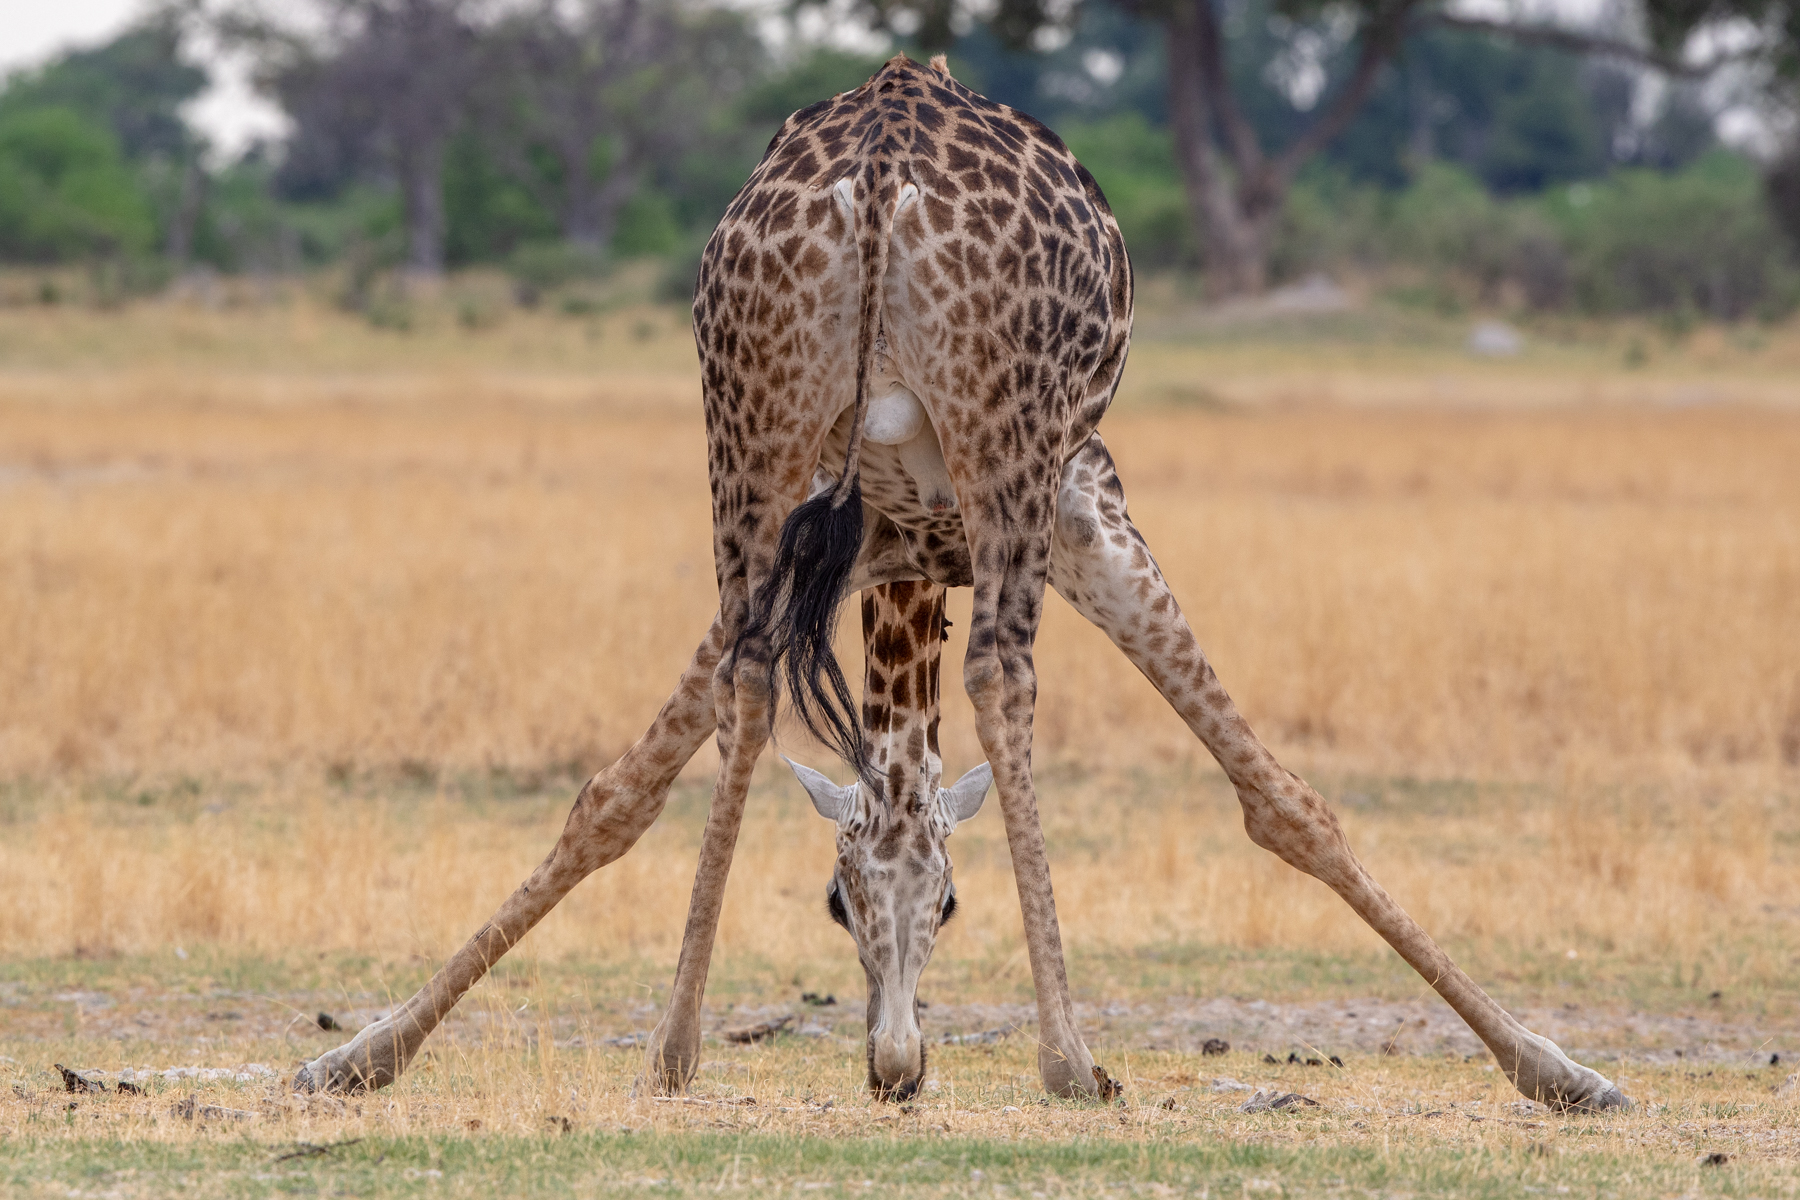 There are few things stranger than a giraffe feeding from the ground. This is a Southern Giraffe in Botswana